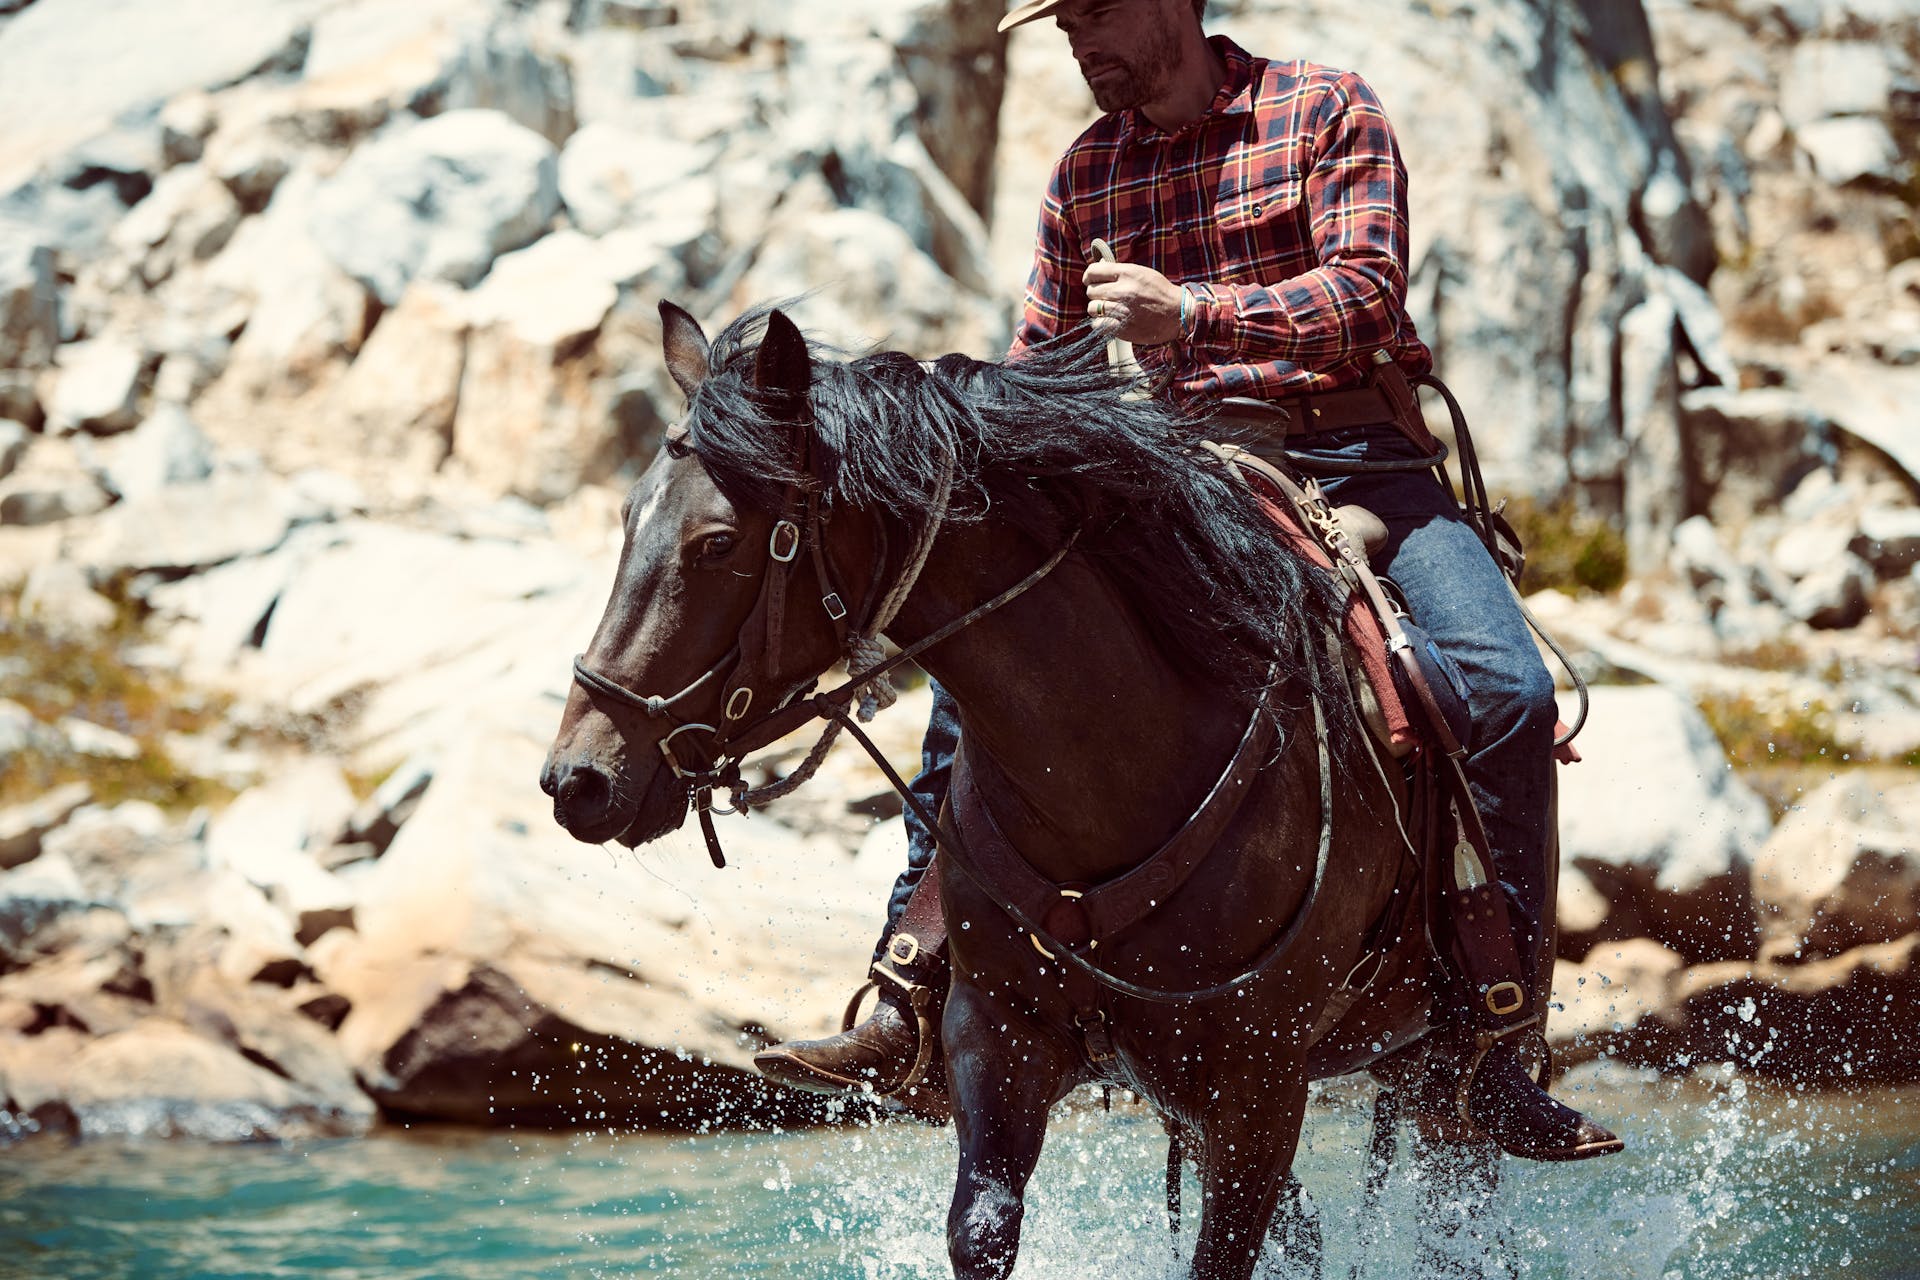 Man riding a horse through water with a Filson Bird & Trout knife in a sheath on his belt